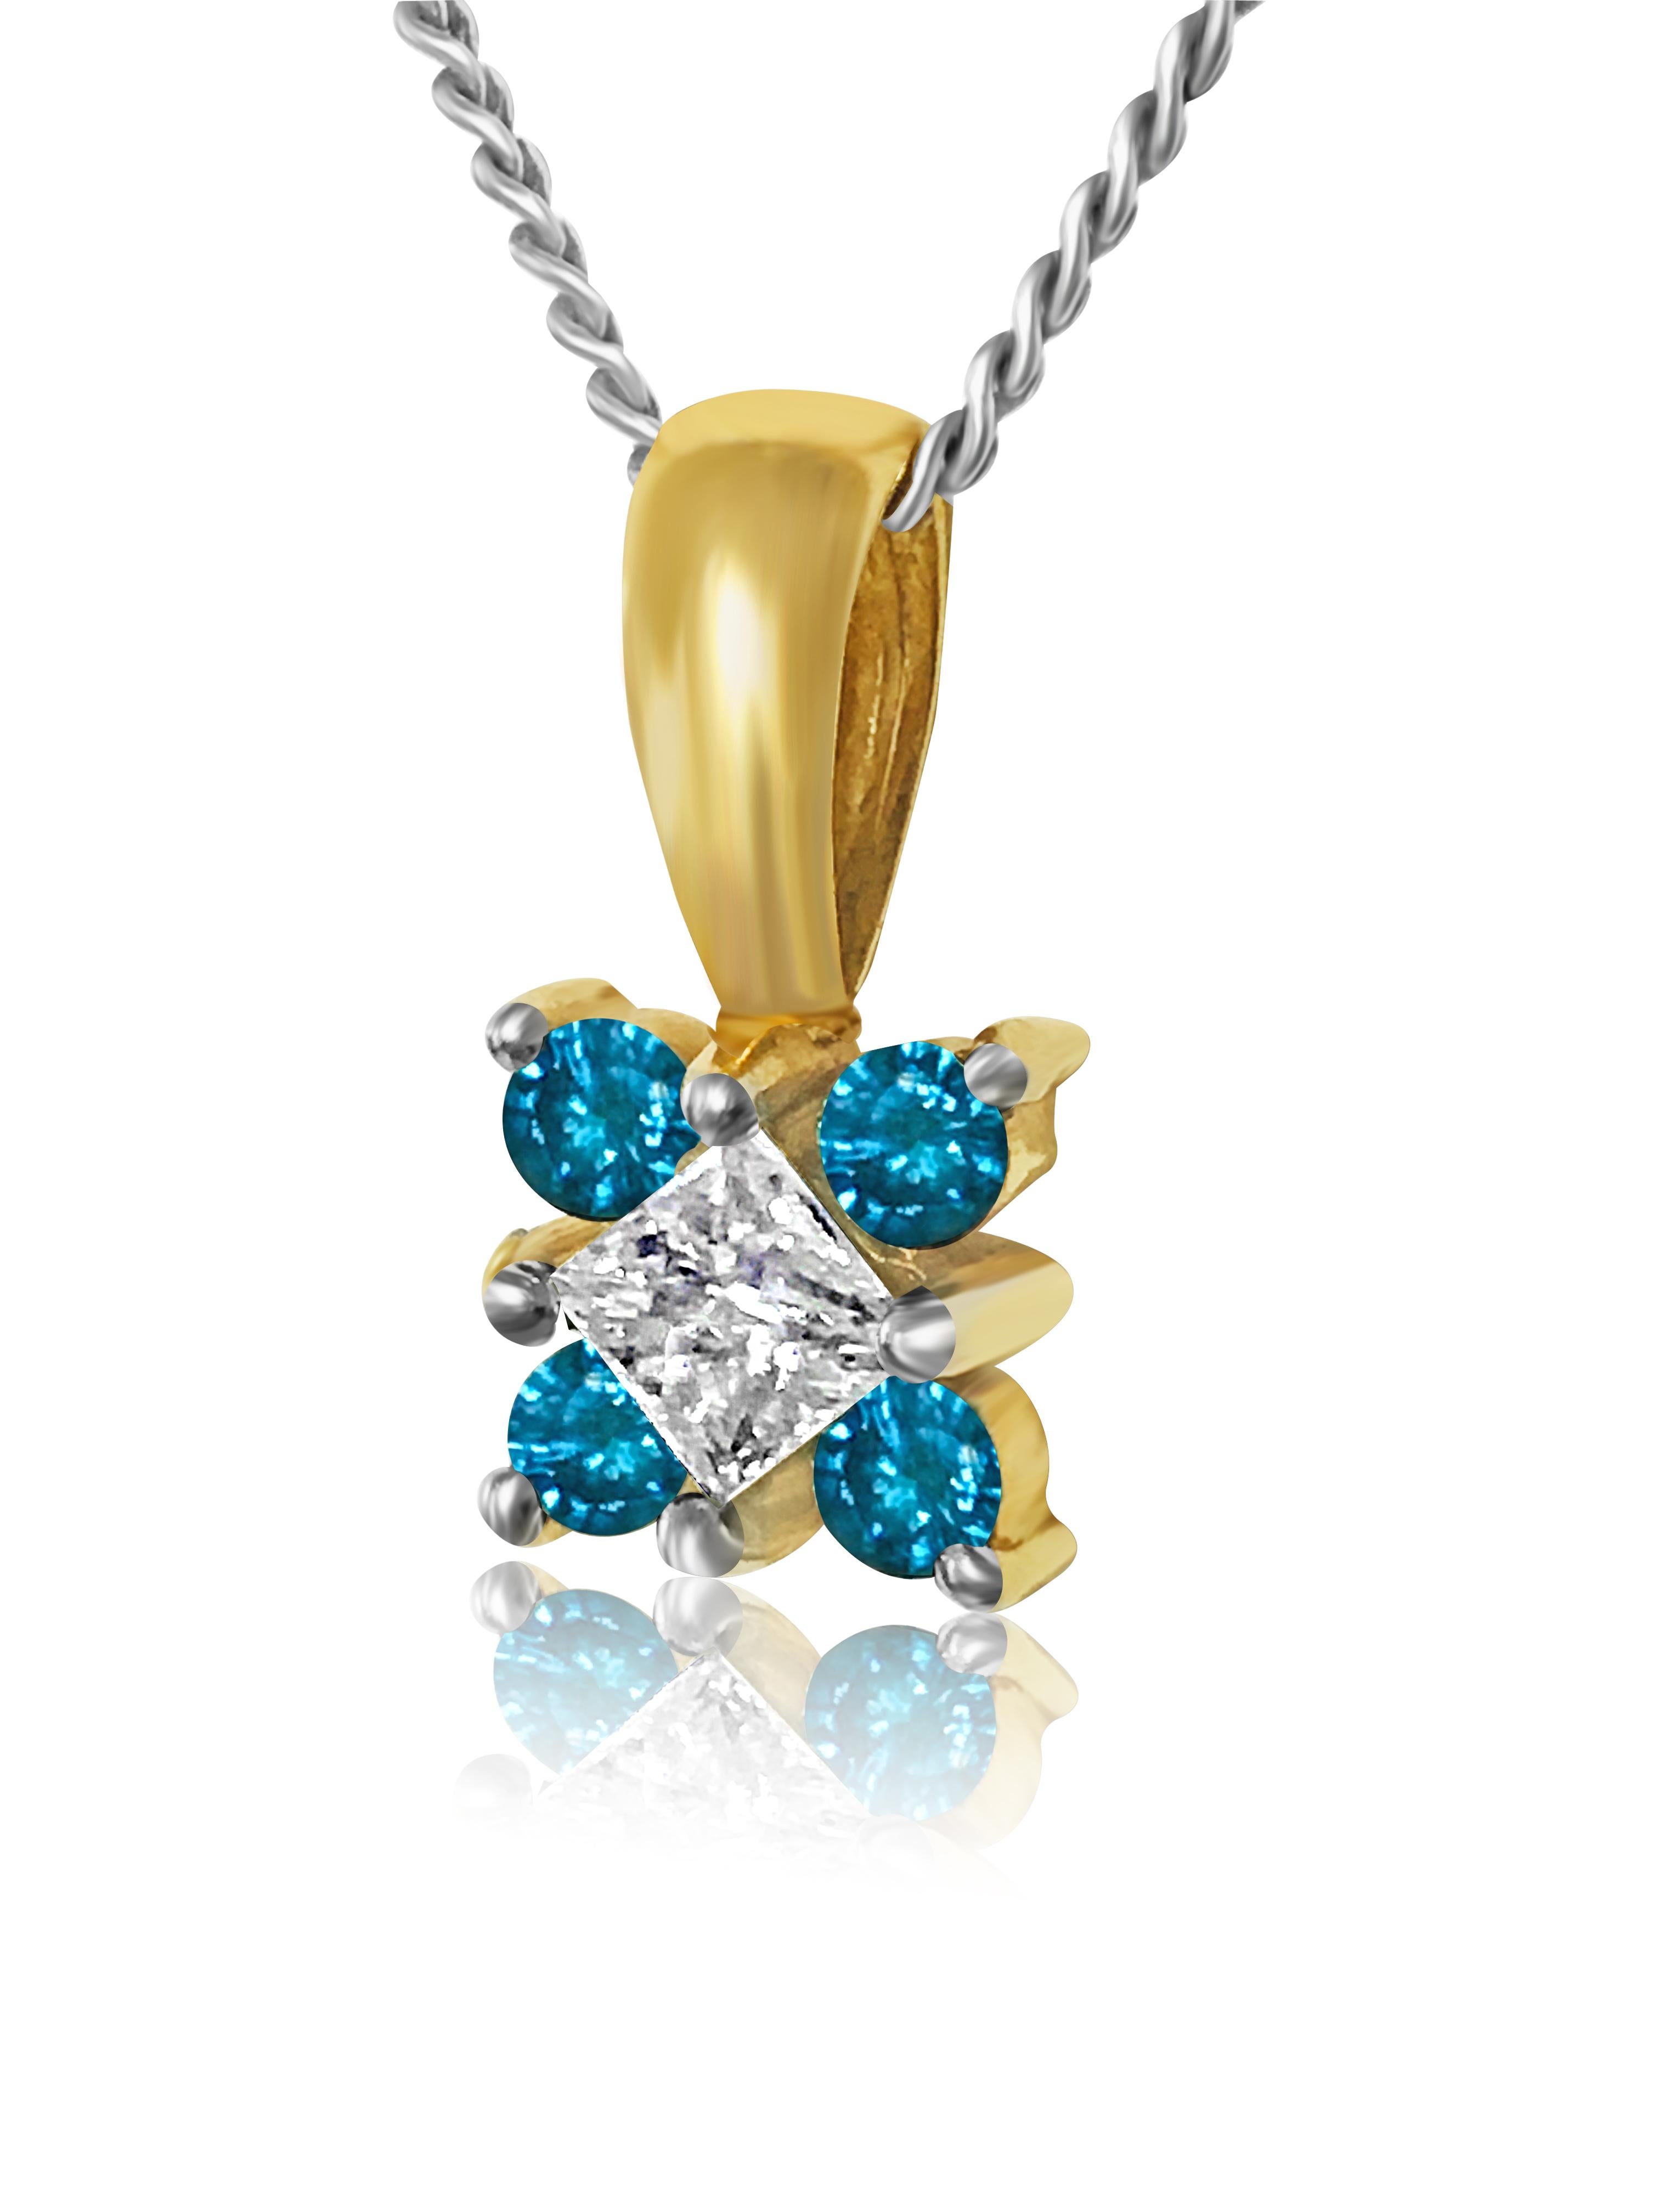 Enhance your elegance with this stunning pendant crafted from 14k yellow gold, adorned with a total of 0.60 carats of natural earth-mined diamonds, including 0.40 carats of round brilliant-cut white diamonds and 0.20 carats of blue diamonds, all